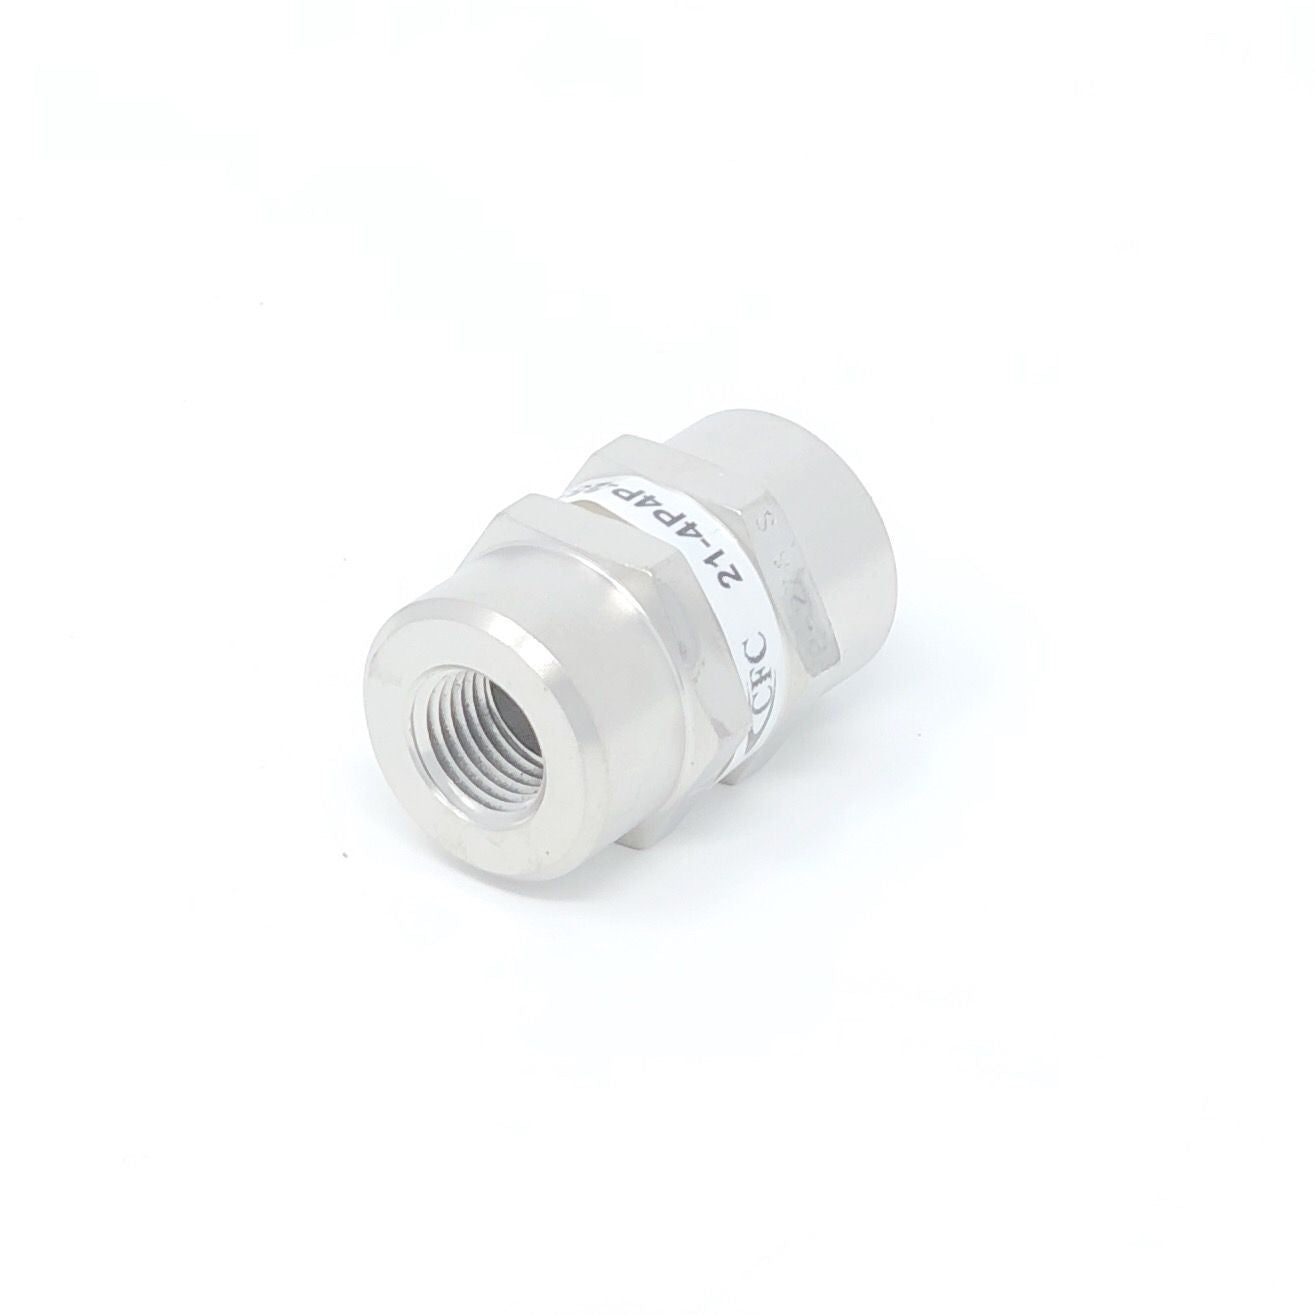 21-12M12M-25S : Chase High Pressure Inline Filter, 3000psi, #12 SAE (3/4"), 25 Micron, No Visual Indicator, With Bypass